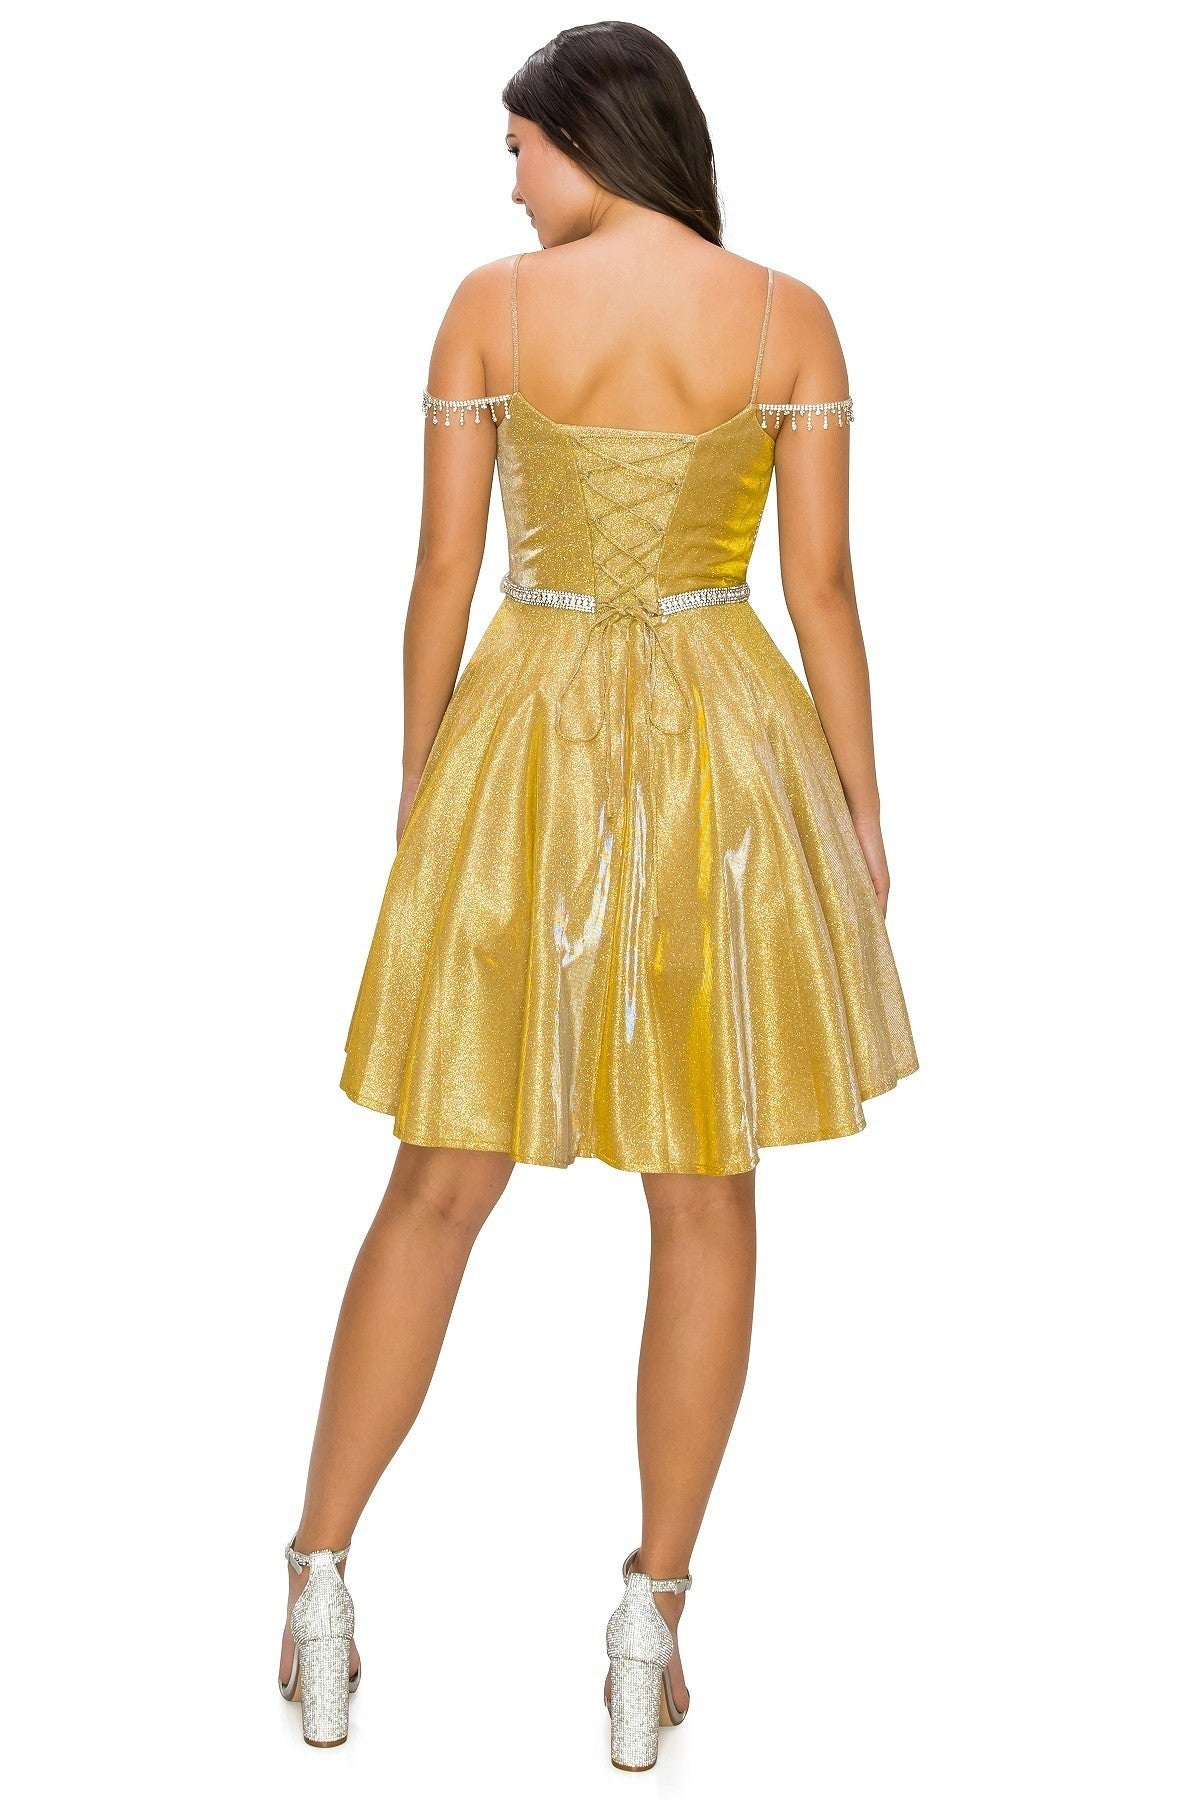 Metallic Glitter Short Party Dress by Cinderella Couture USA AS8014J-GOLD